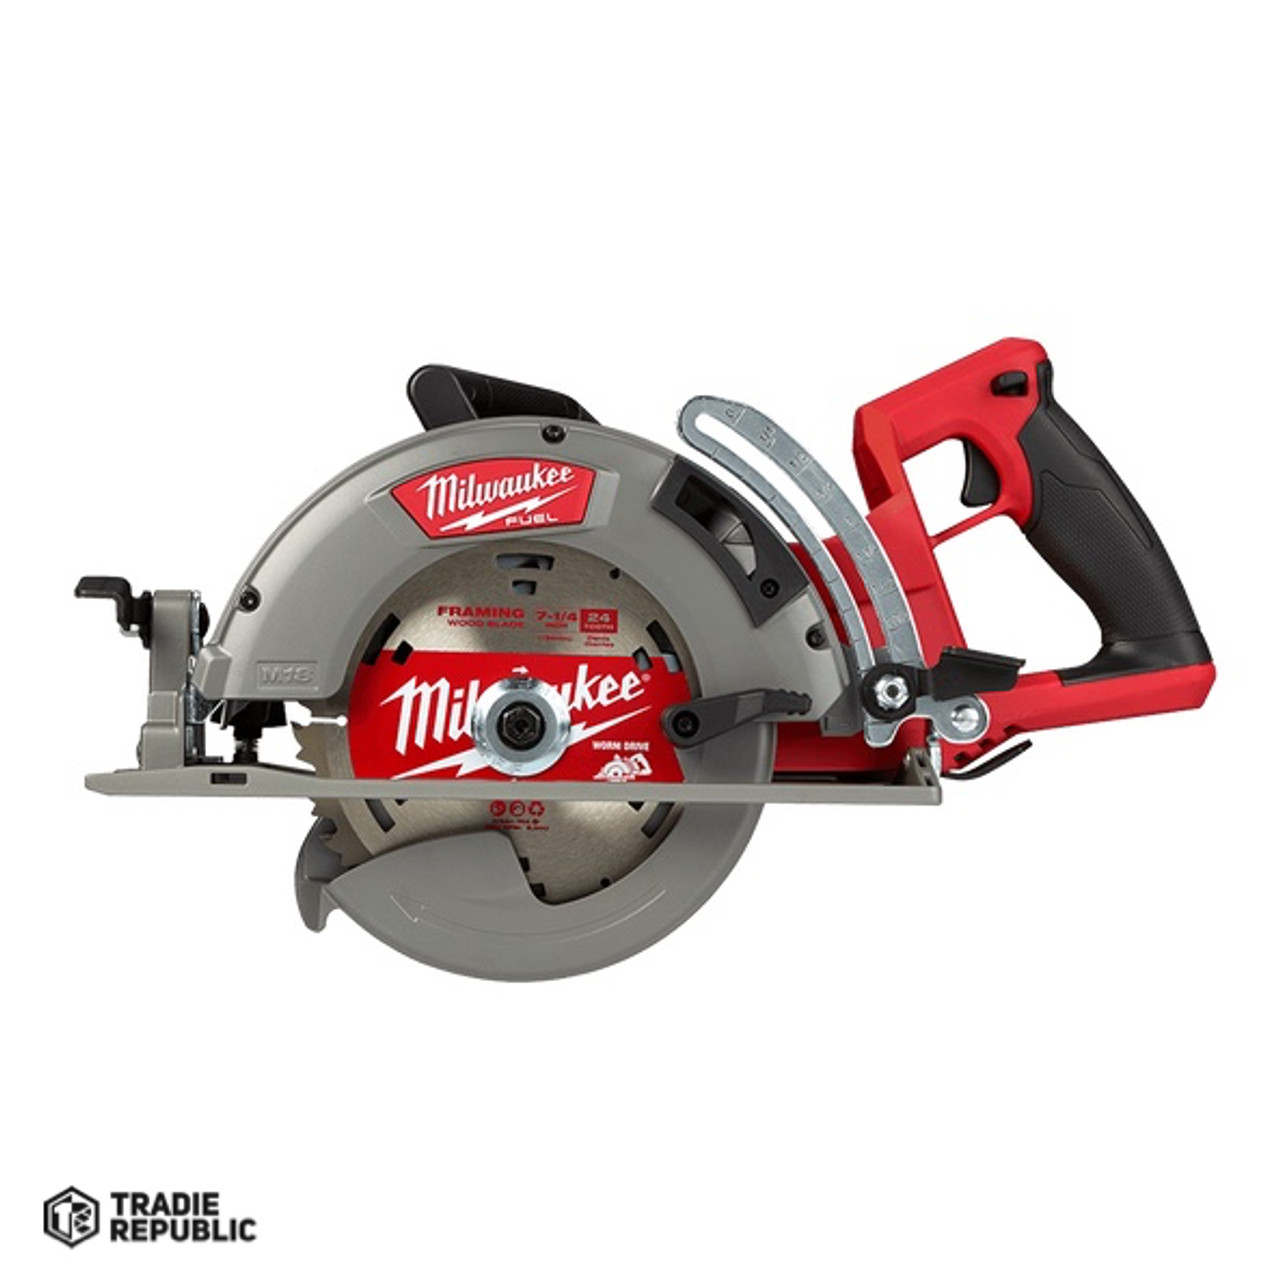 M18FCSRH66-0 Milwaukee Rear Handle 184mm Circular Saw- Tool Only